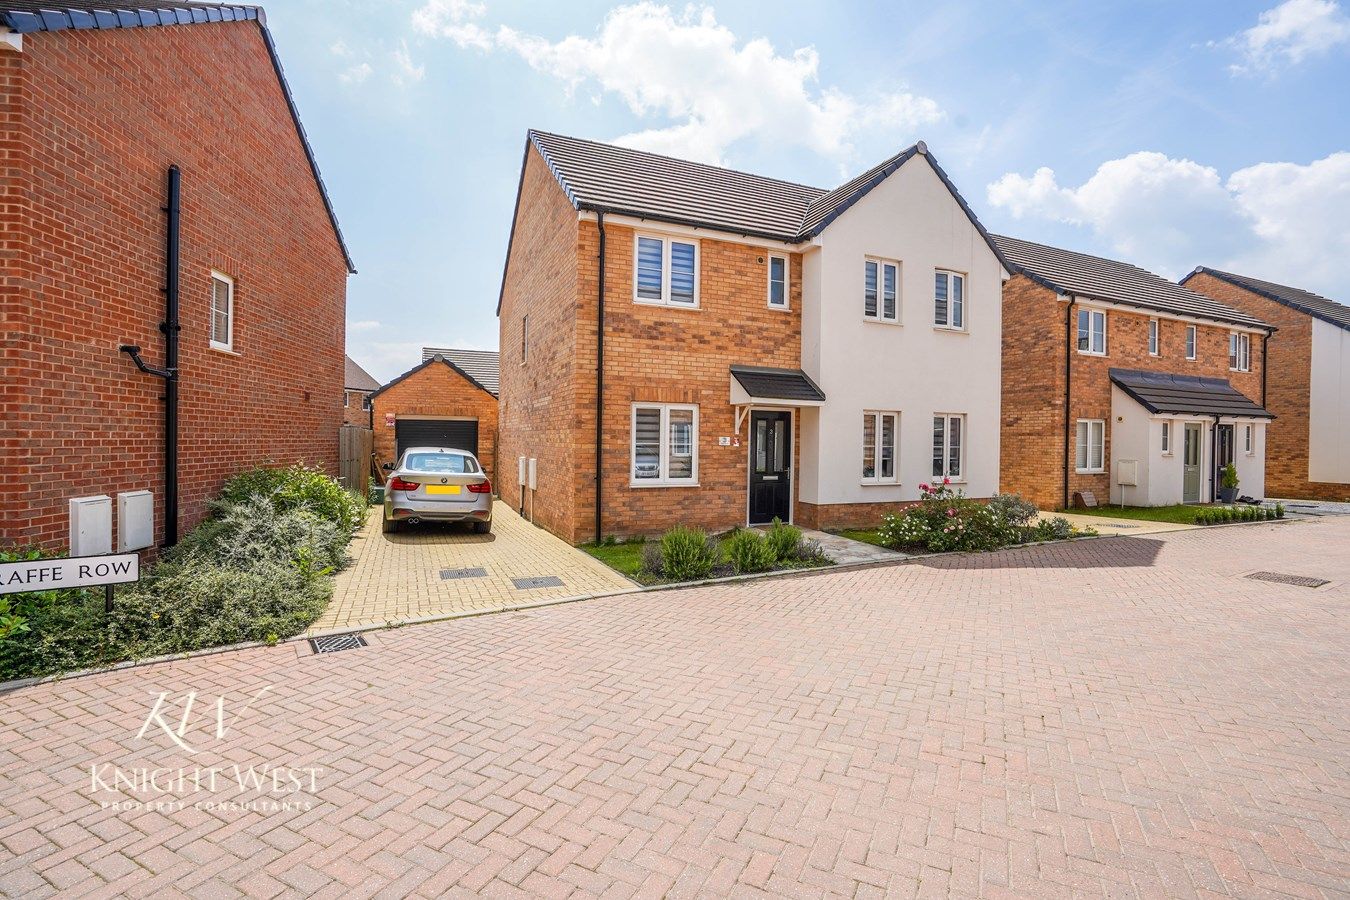 4 bed detached house for sale in Giraffe Rowe, Colchester CO3 - Zoopla